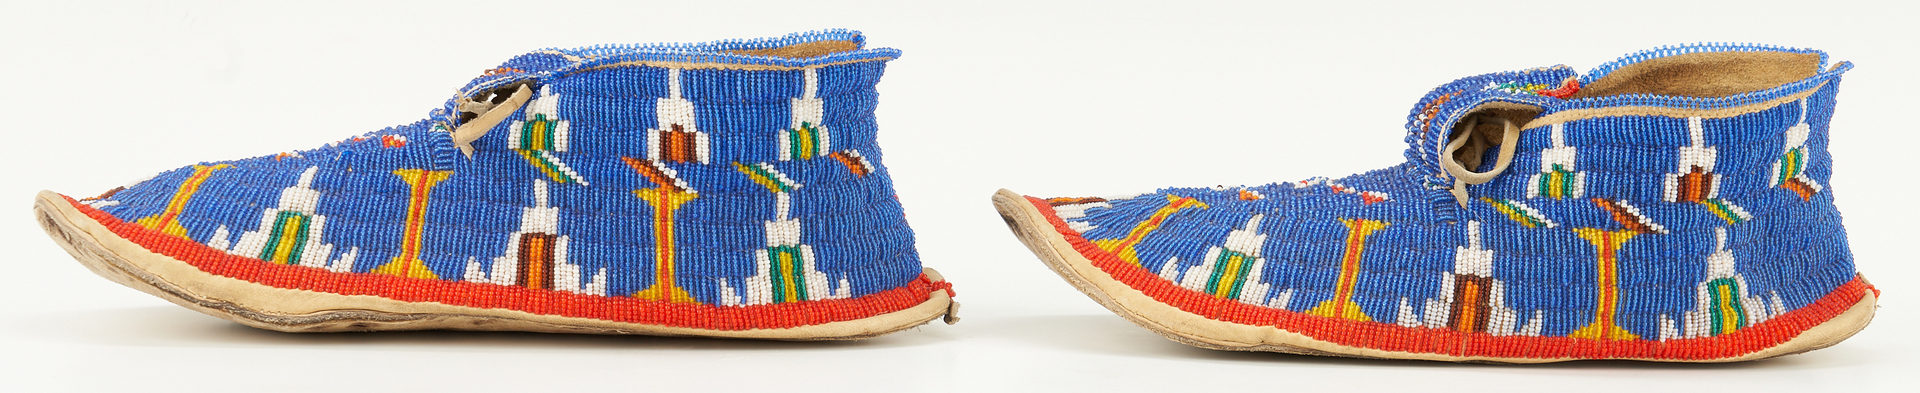 Lot 666: Pair Native American Plains Indian Beaded Moccasins